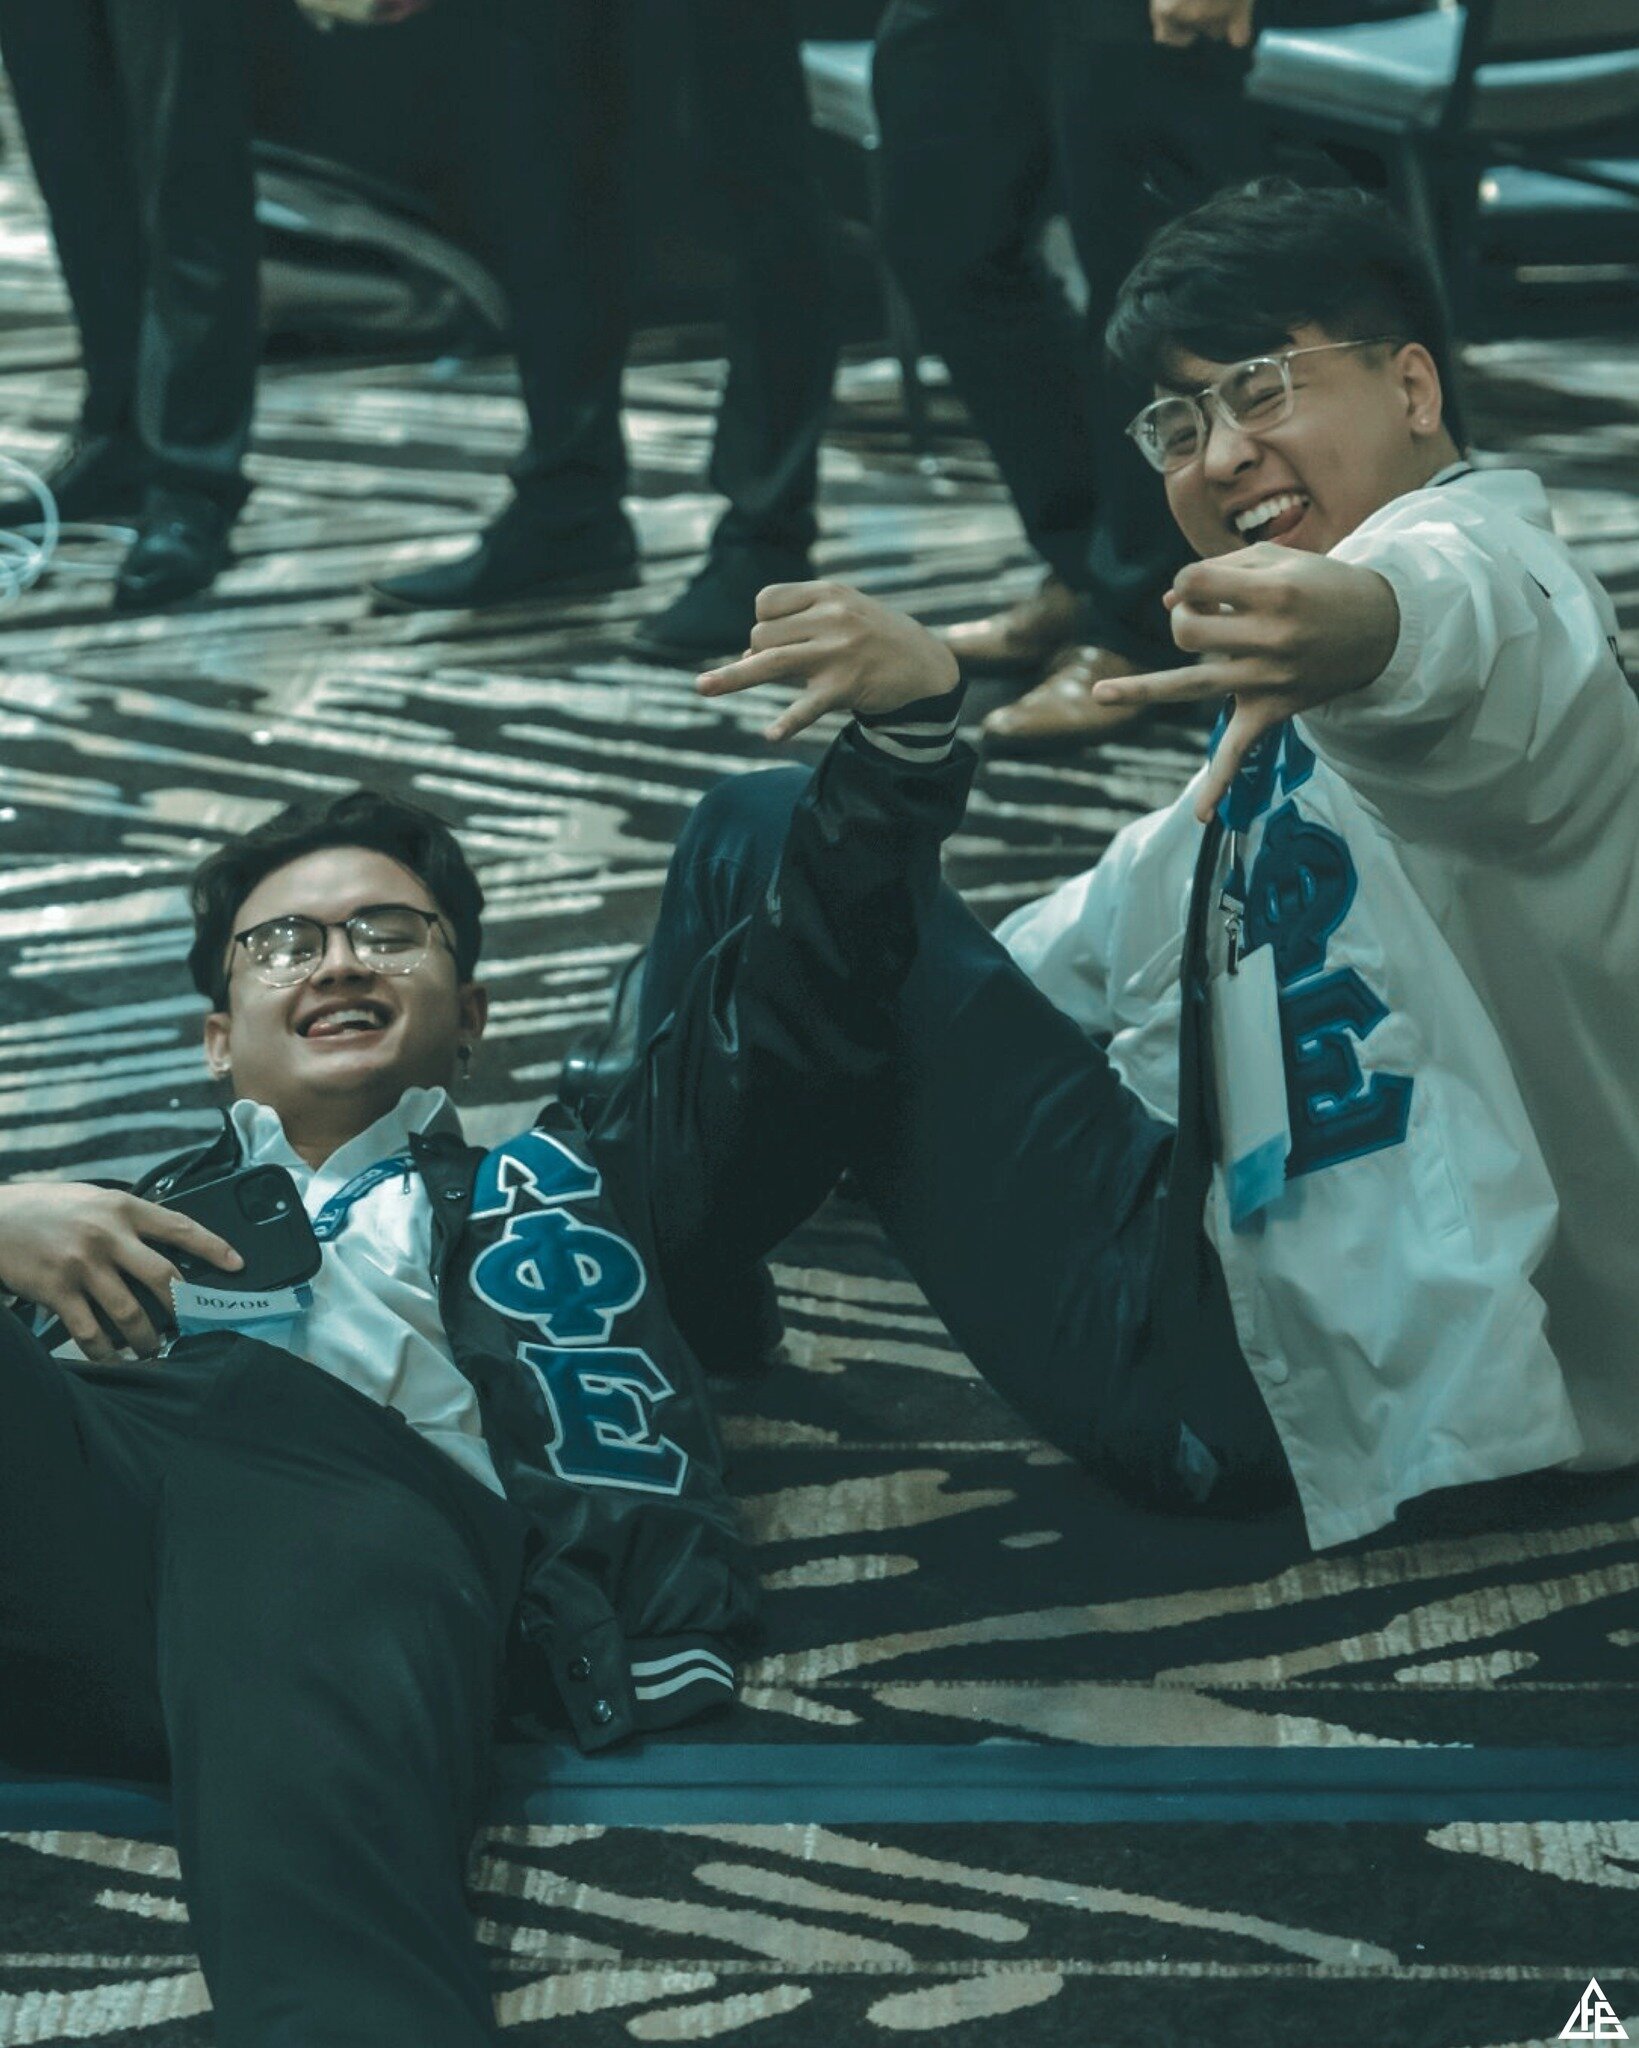 A brother is a friend who doubles the joy and halves the sorrows. When was the last time you shared a hearty laugh with a brother? 🤣 #LPhiE #WorldKindnessDay #Brotherhood